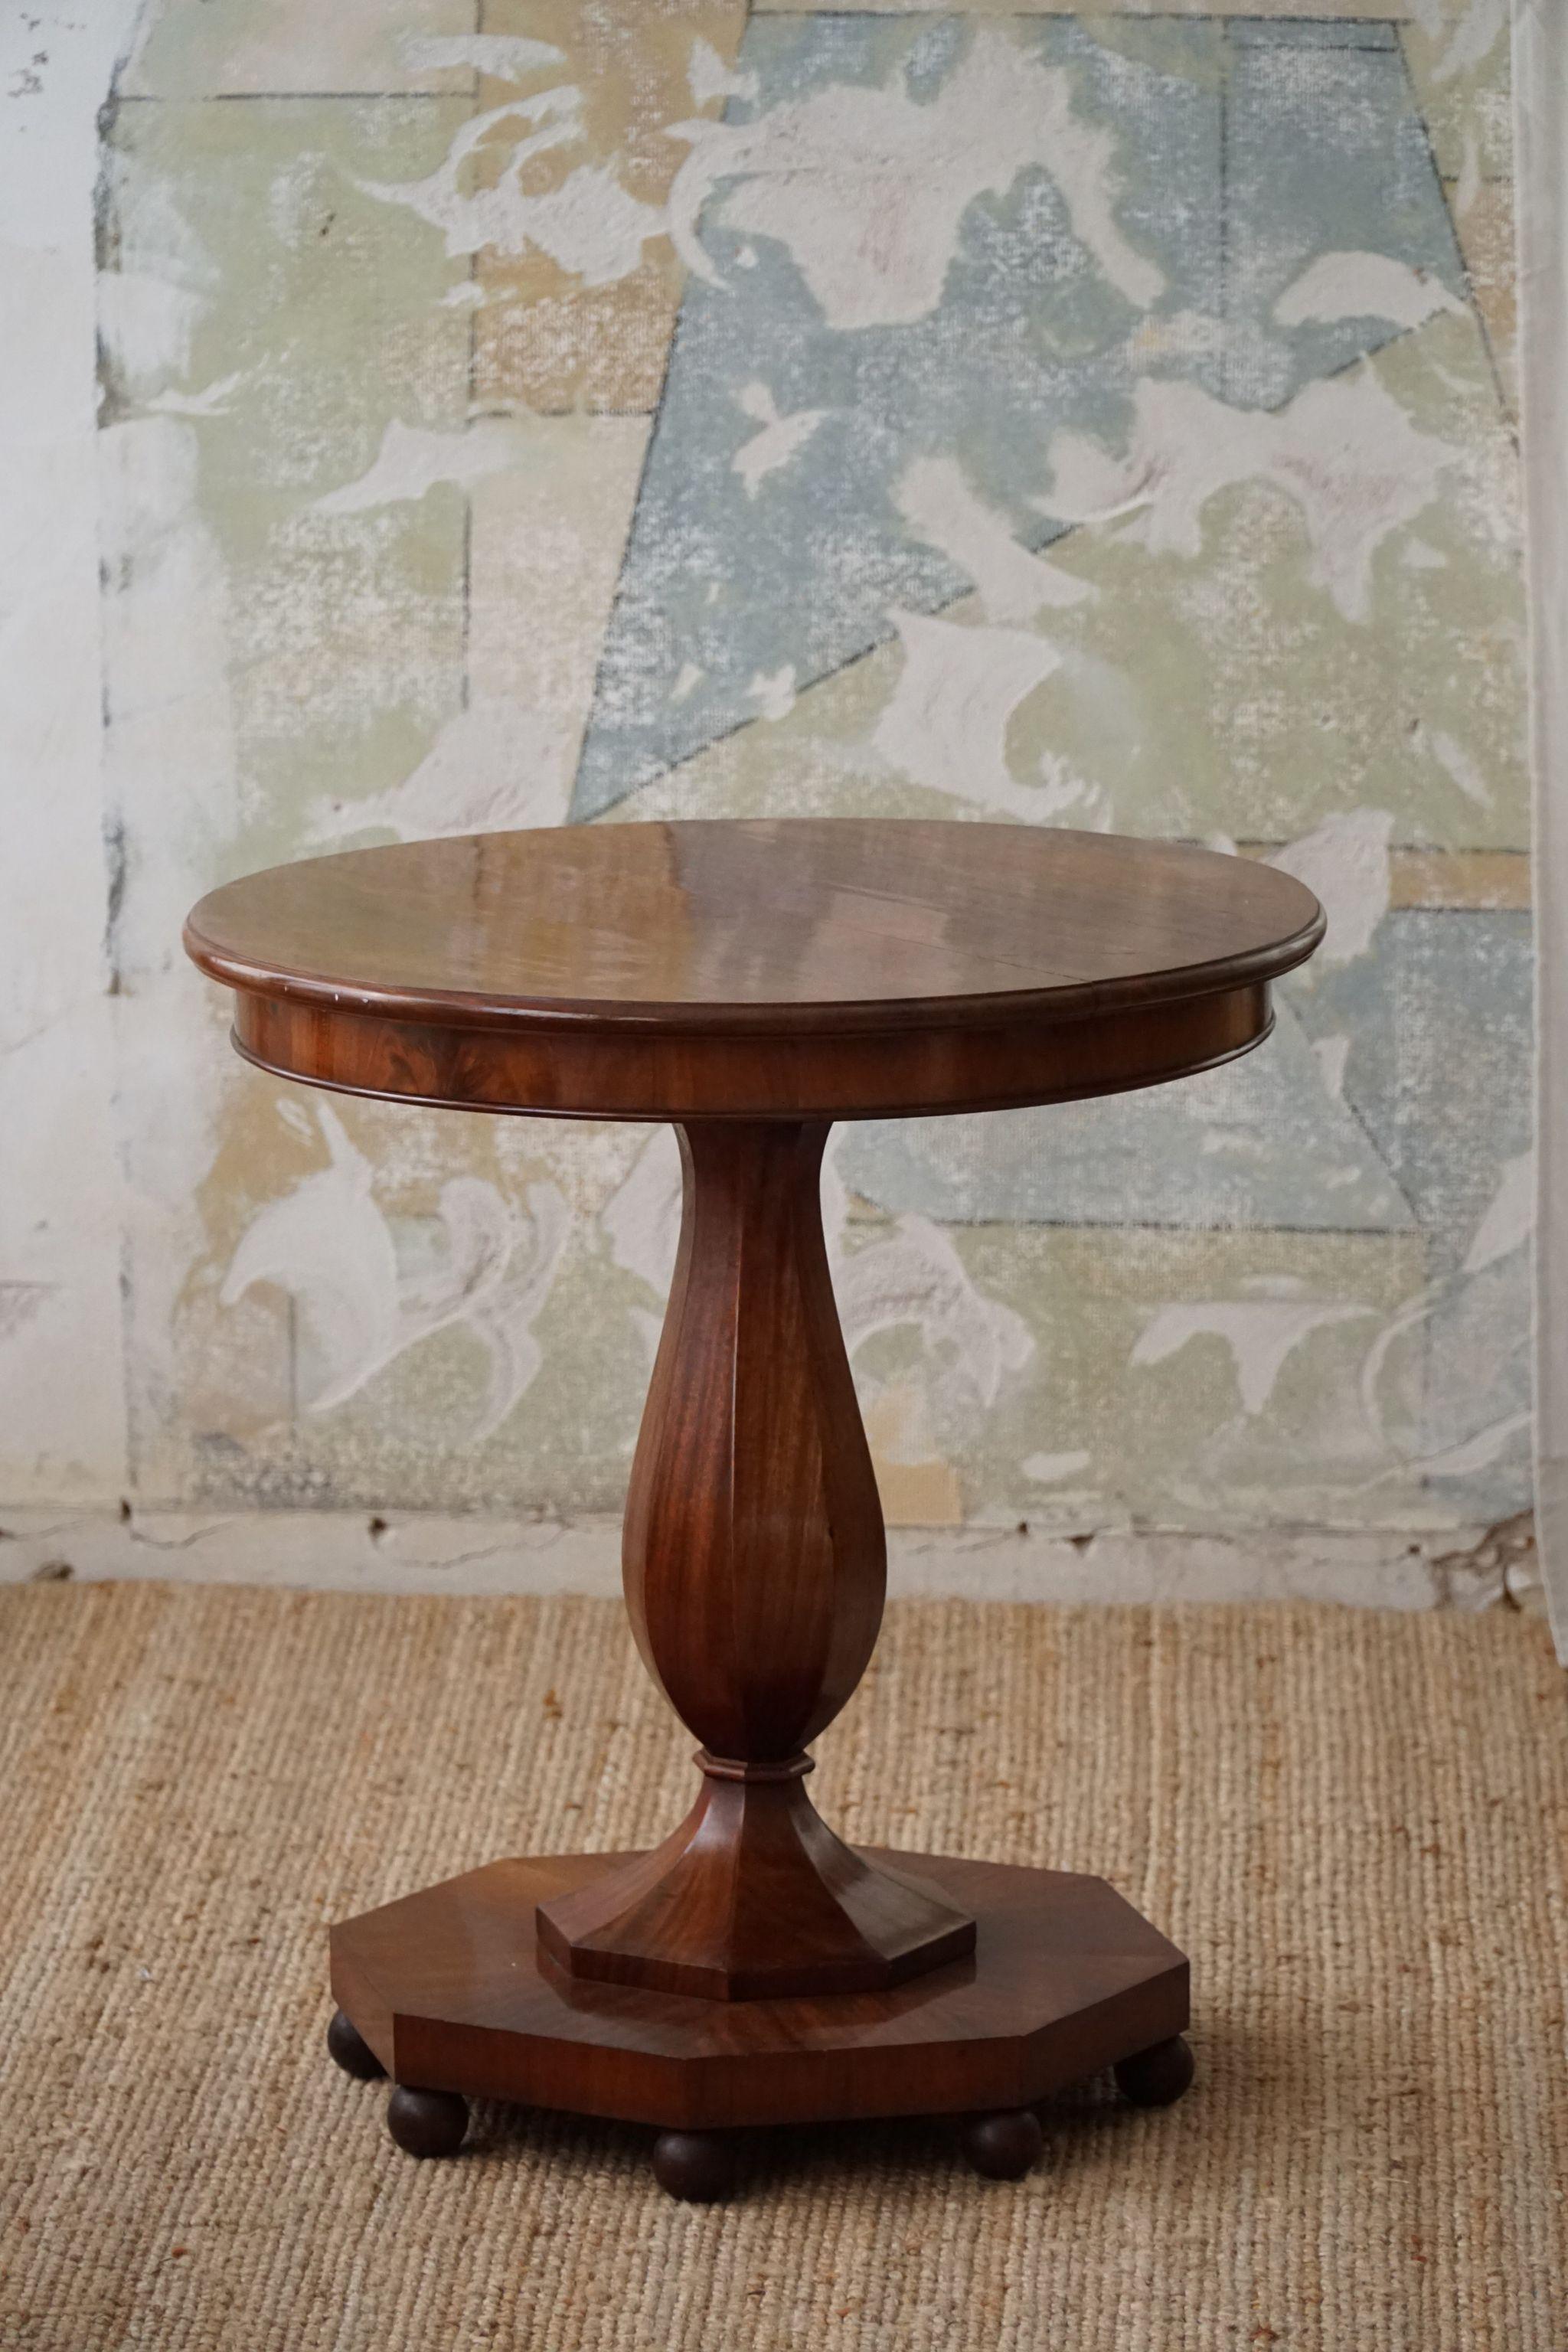 Art Deco, Round Pedestal / Side Table in Walnut, By a Danish Cabinetmaker, 1940s For Sale 5